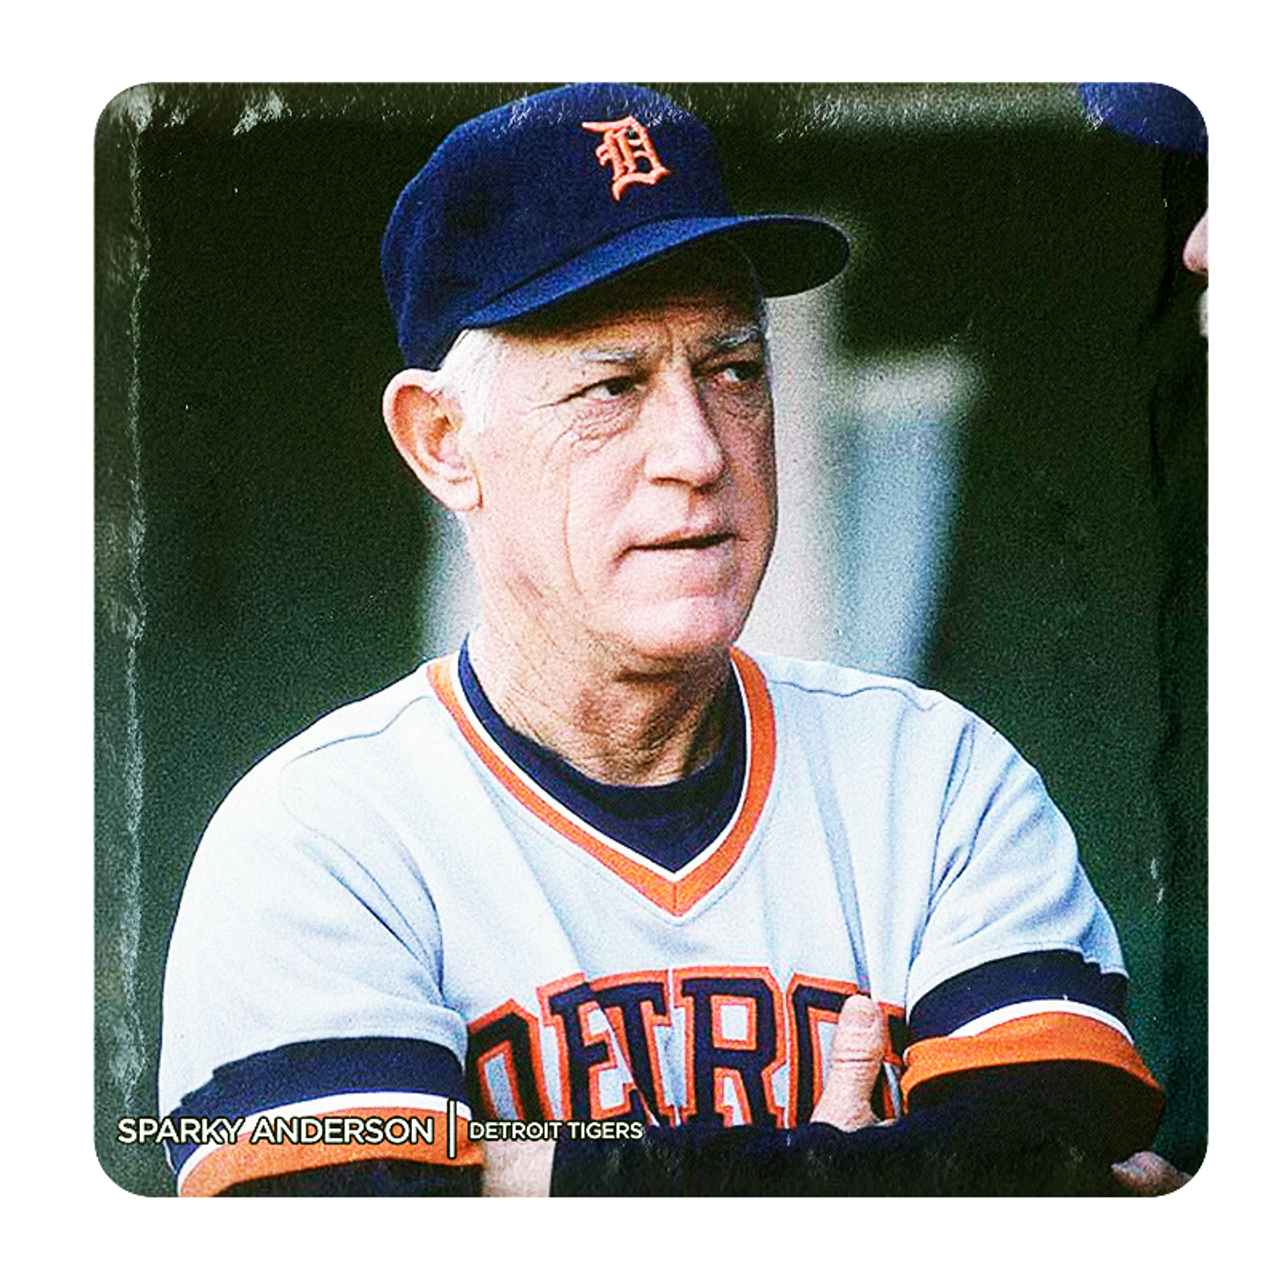 One and done: The Sparky Anderson All-Stars